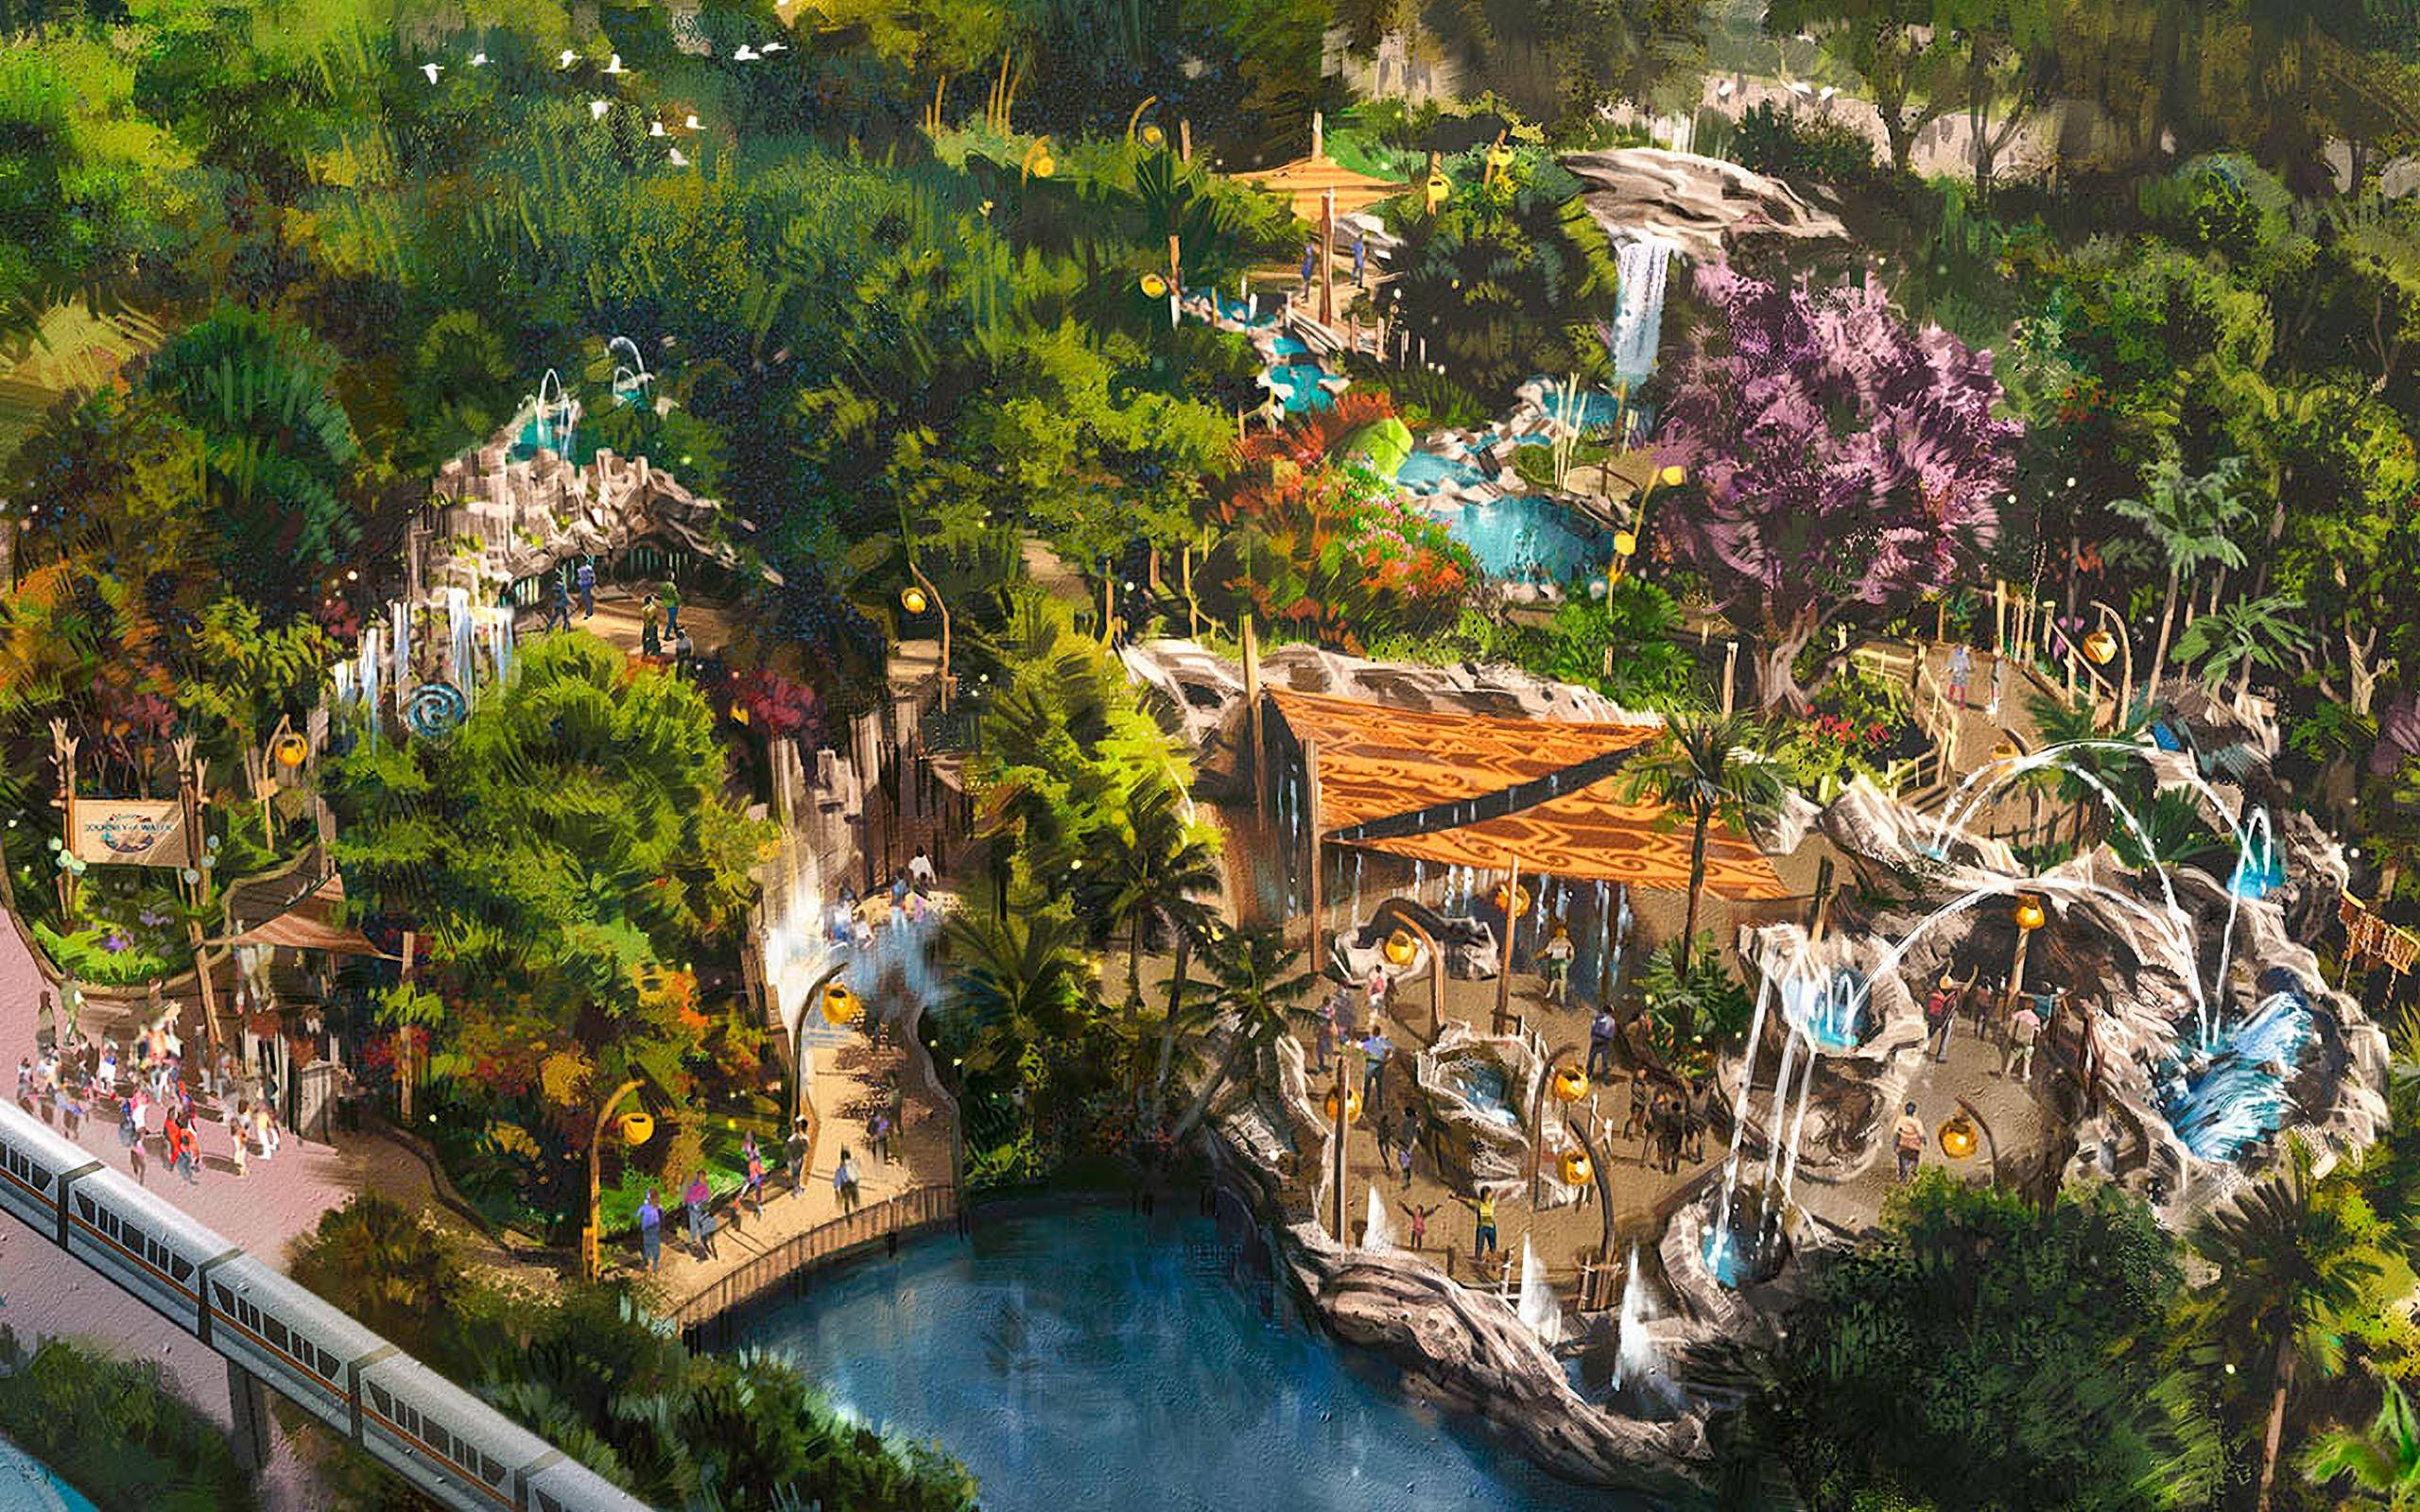 Imagineer Zach Riddley provides an update on EPCOT's 'Journey of Water - Inspired by Moana'